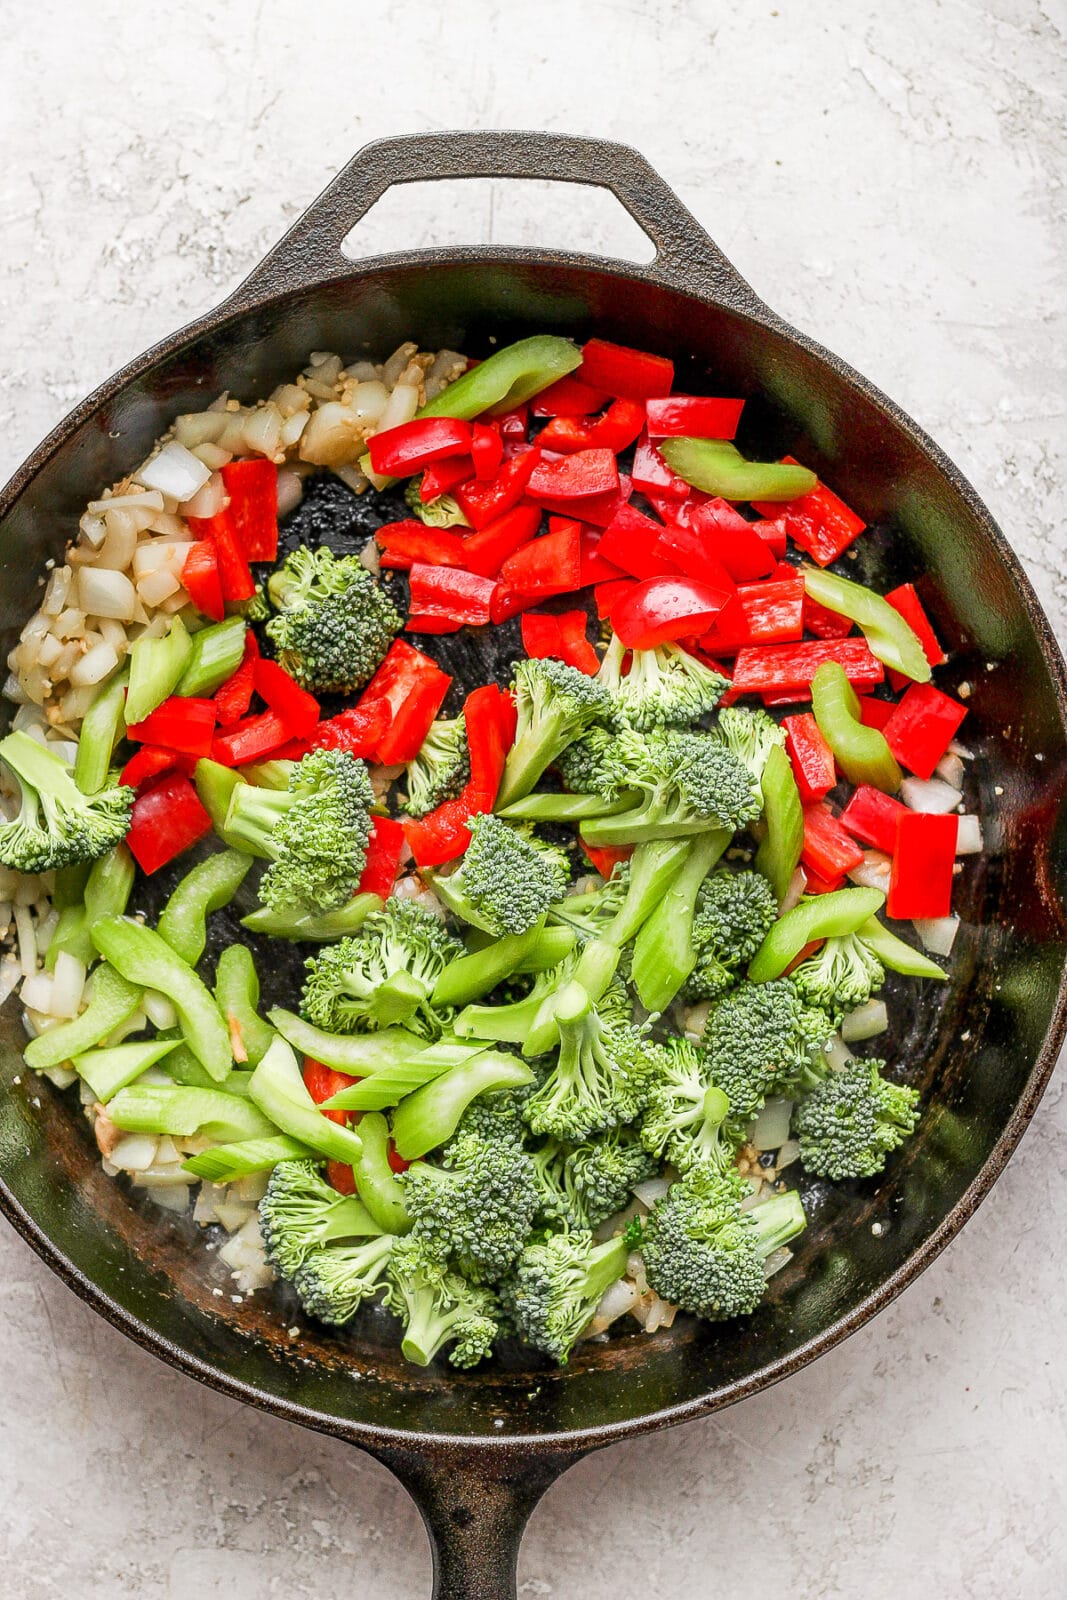 Cast iron pan with cooked garlic & ginger plus broccoli, celery, and red bell pepper.